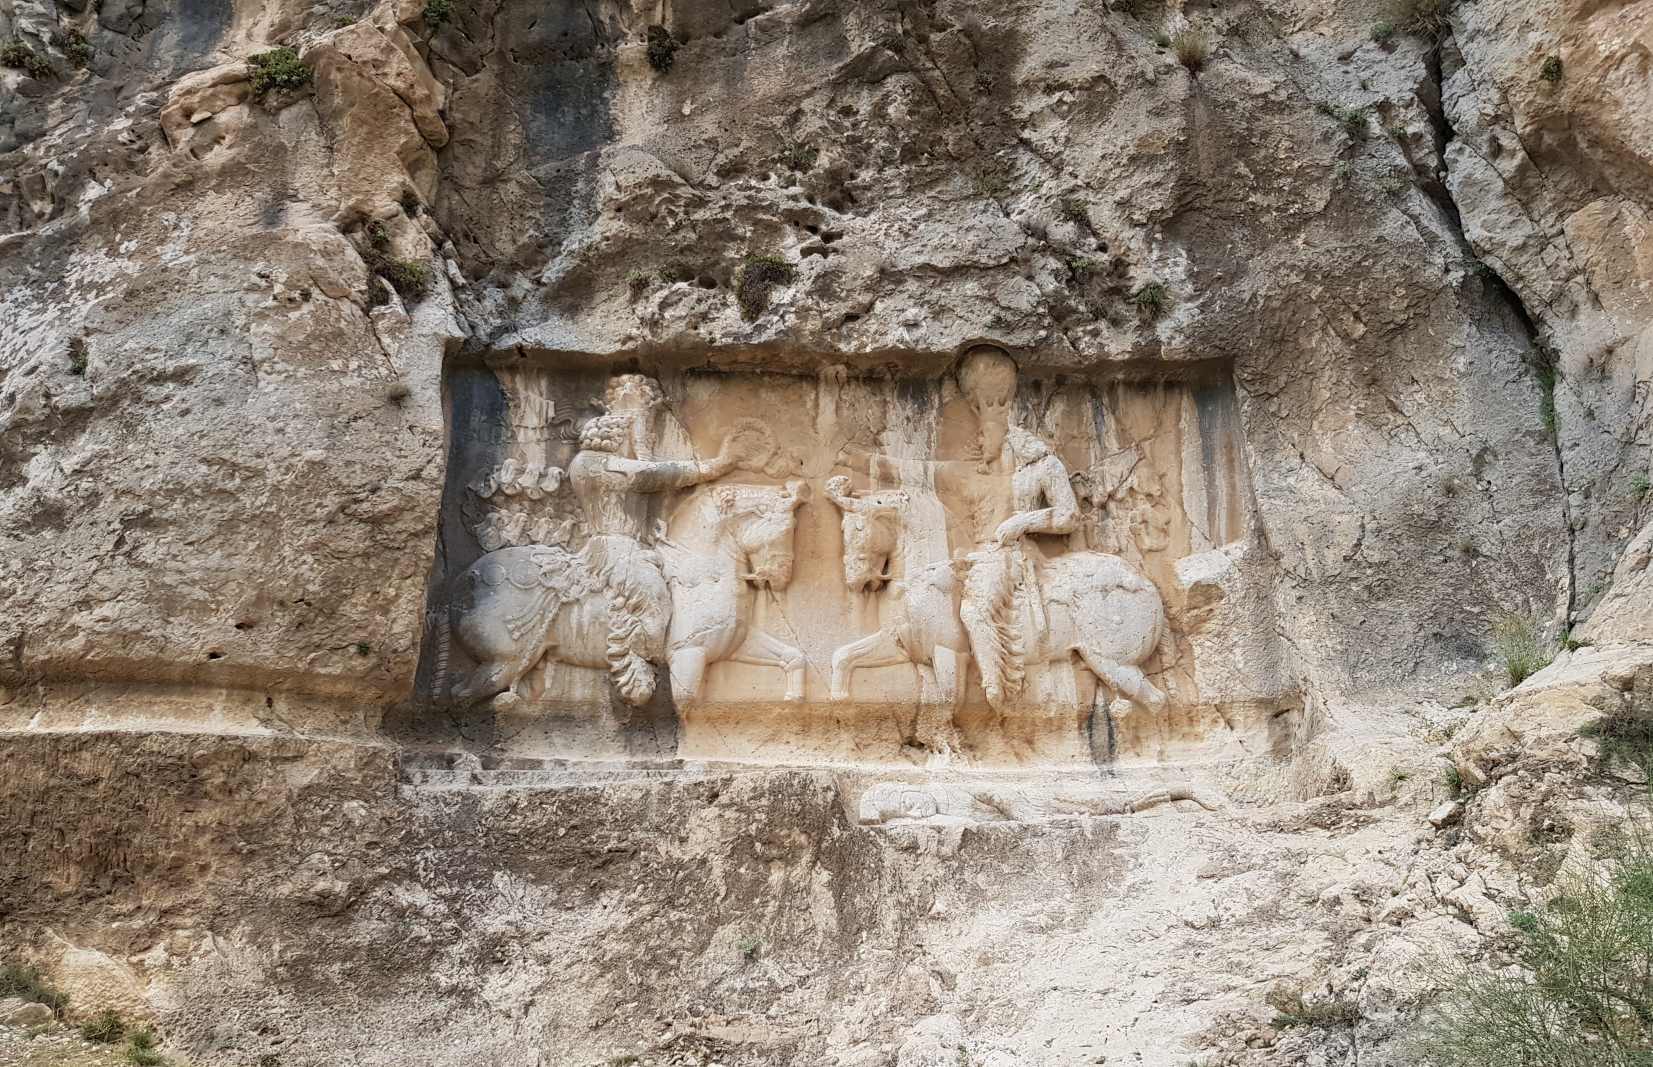 An ancient bas-relief carving that depicts the victory of the Sasanian king Shapur I over the Roman emperor Valerian in c. 260 CE. This Shapur’s bas-relief is situated in Bishapur. Eight archaeological sites that make up the ensemble are spread across three geographical regions: Firuzabad, Sarvestan and Darab, in the Fars province.